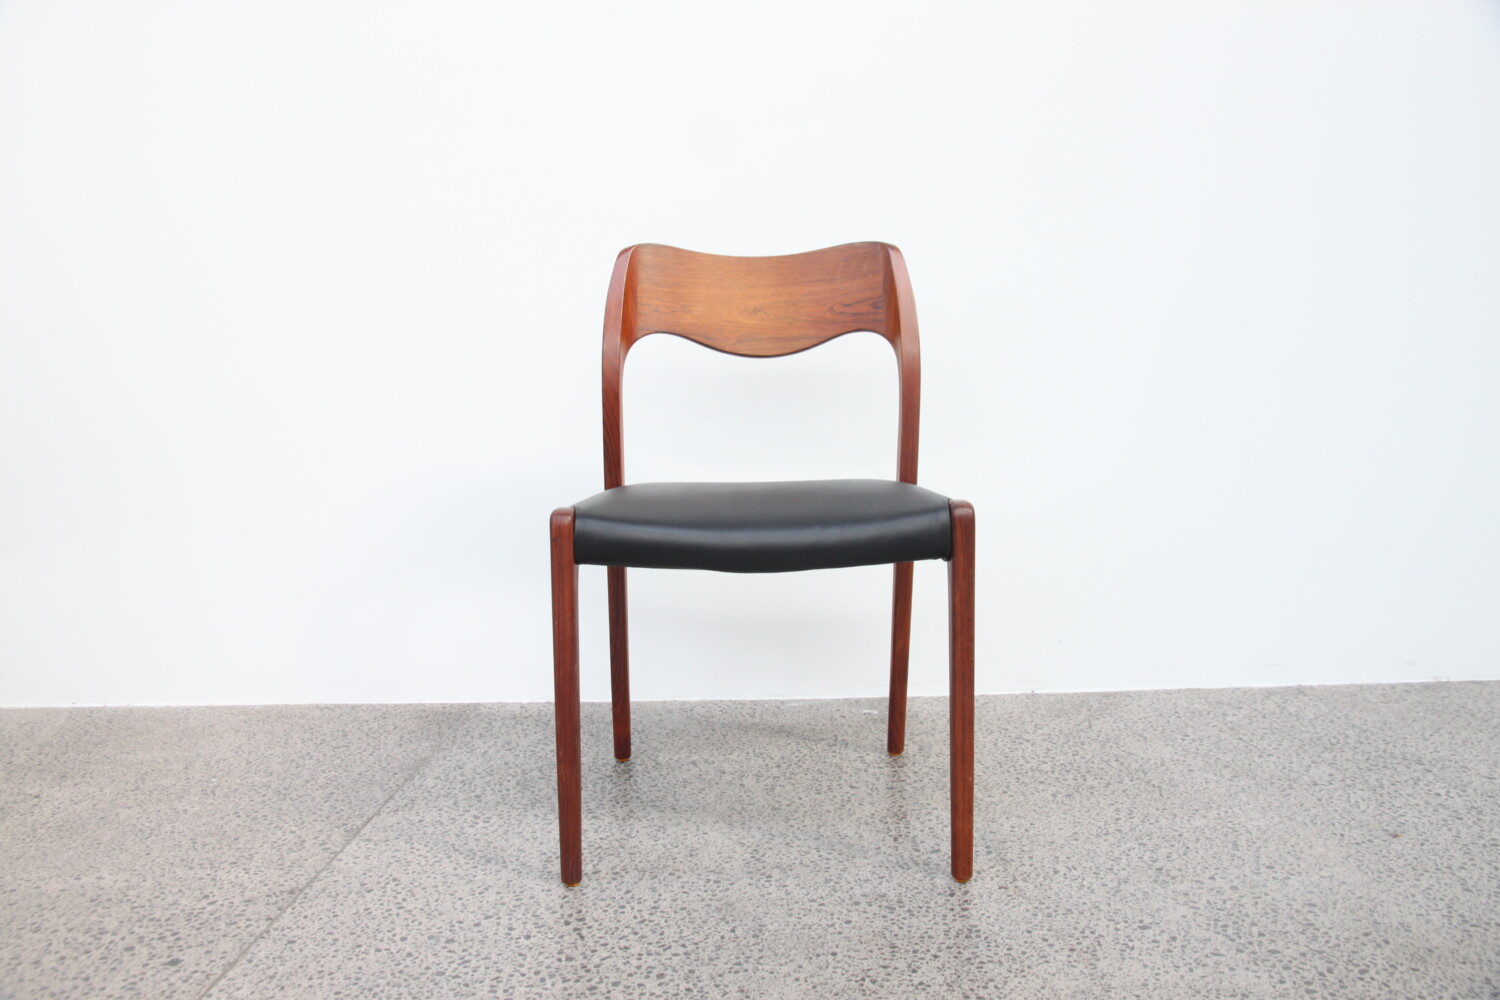 Model 71 Dining Chairs by Niels Moller